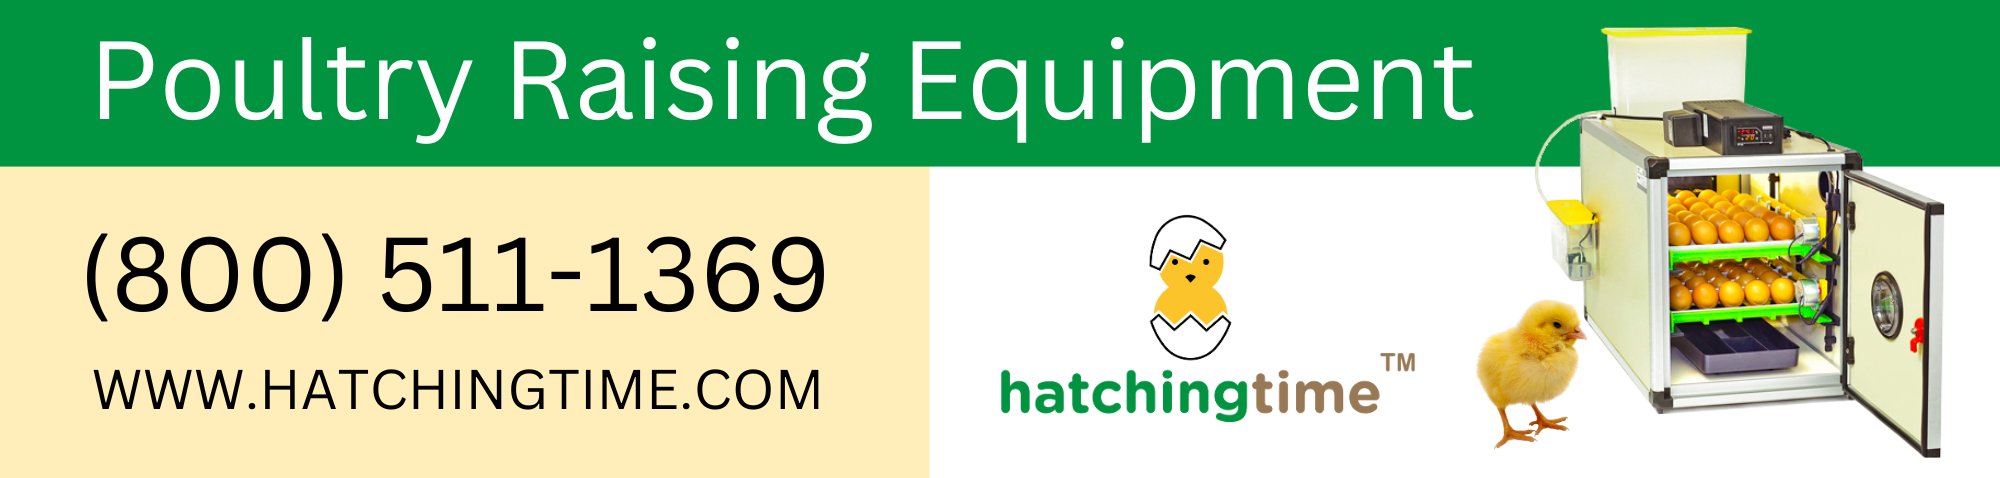 Hatching Time Banner (2).png